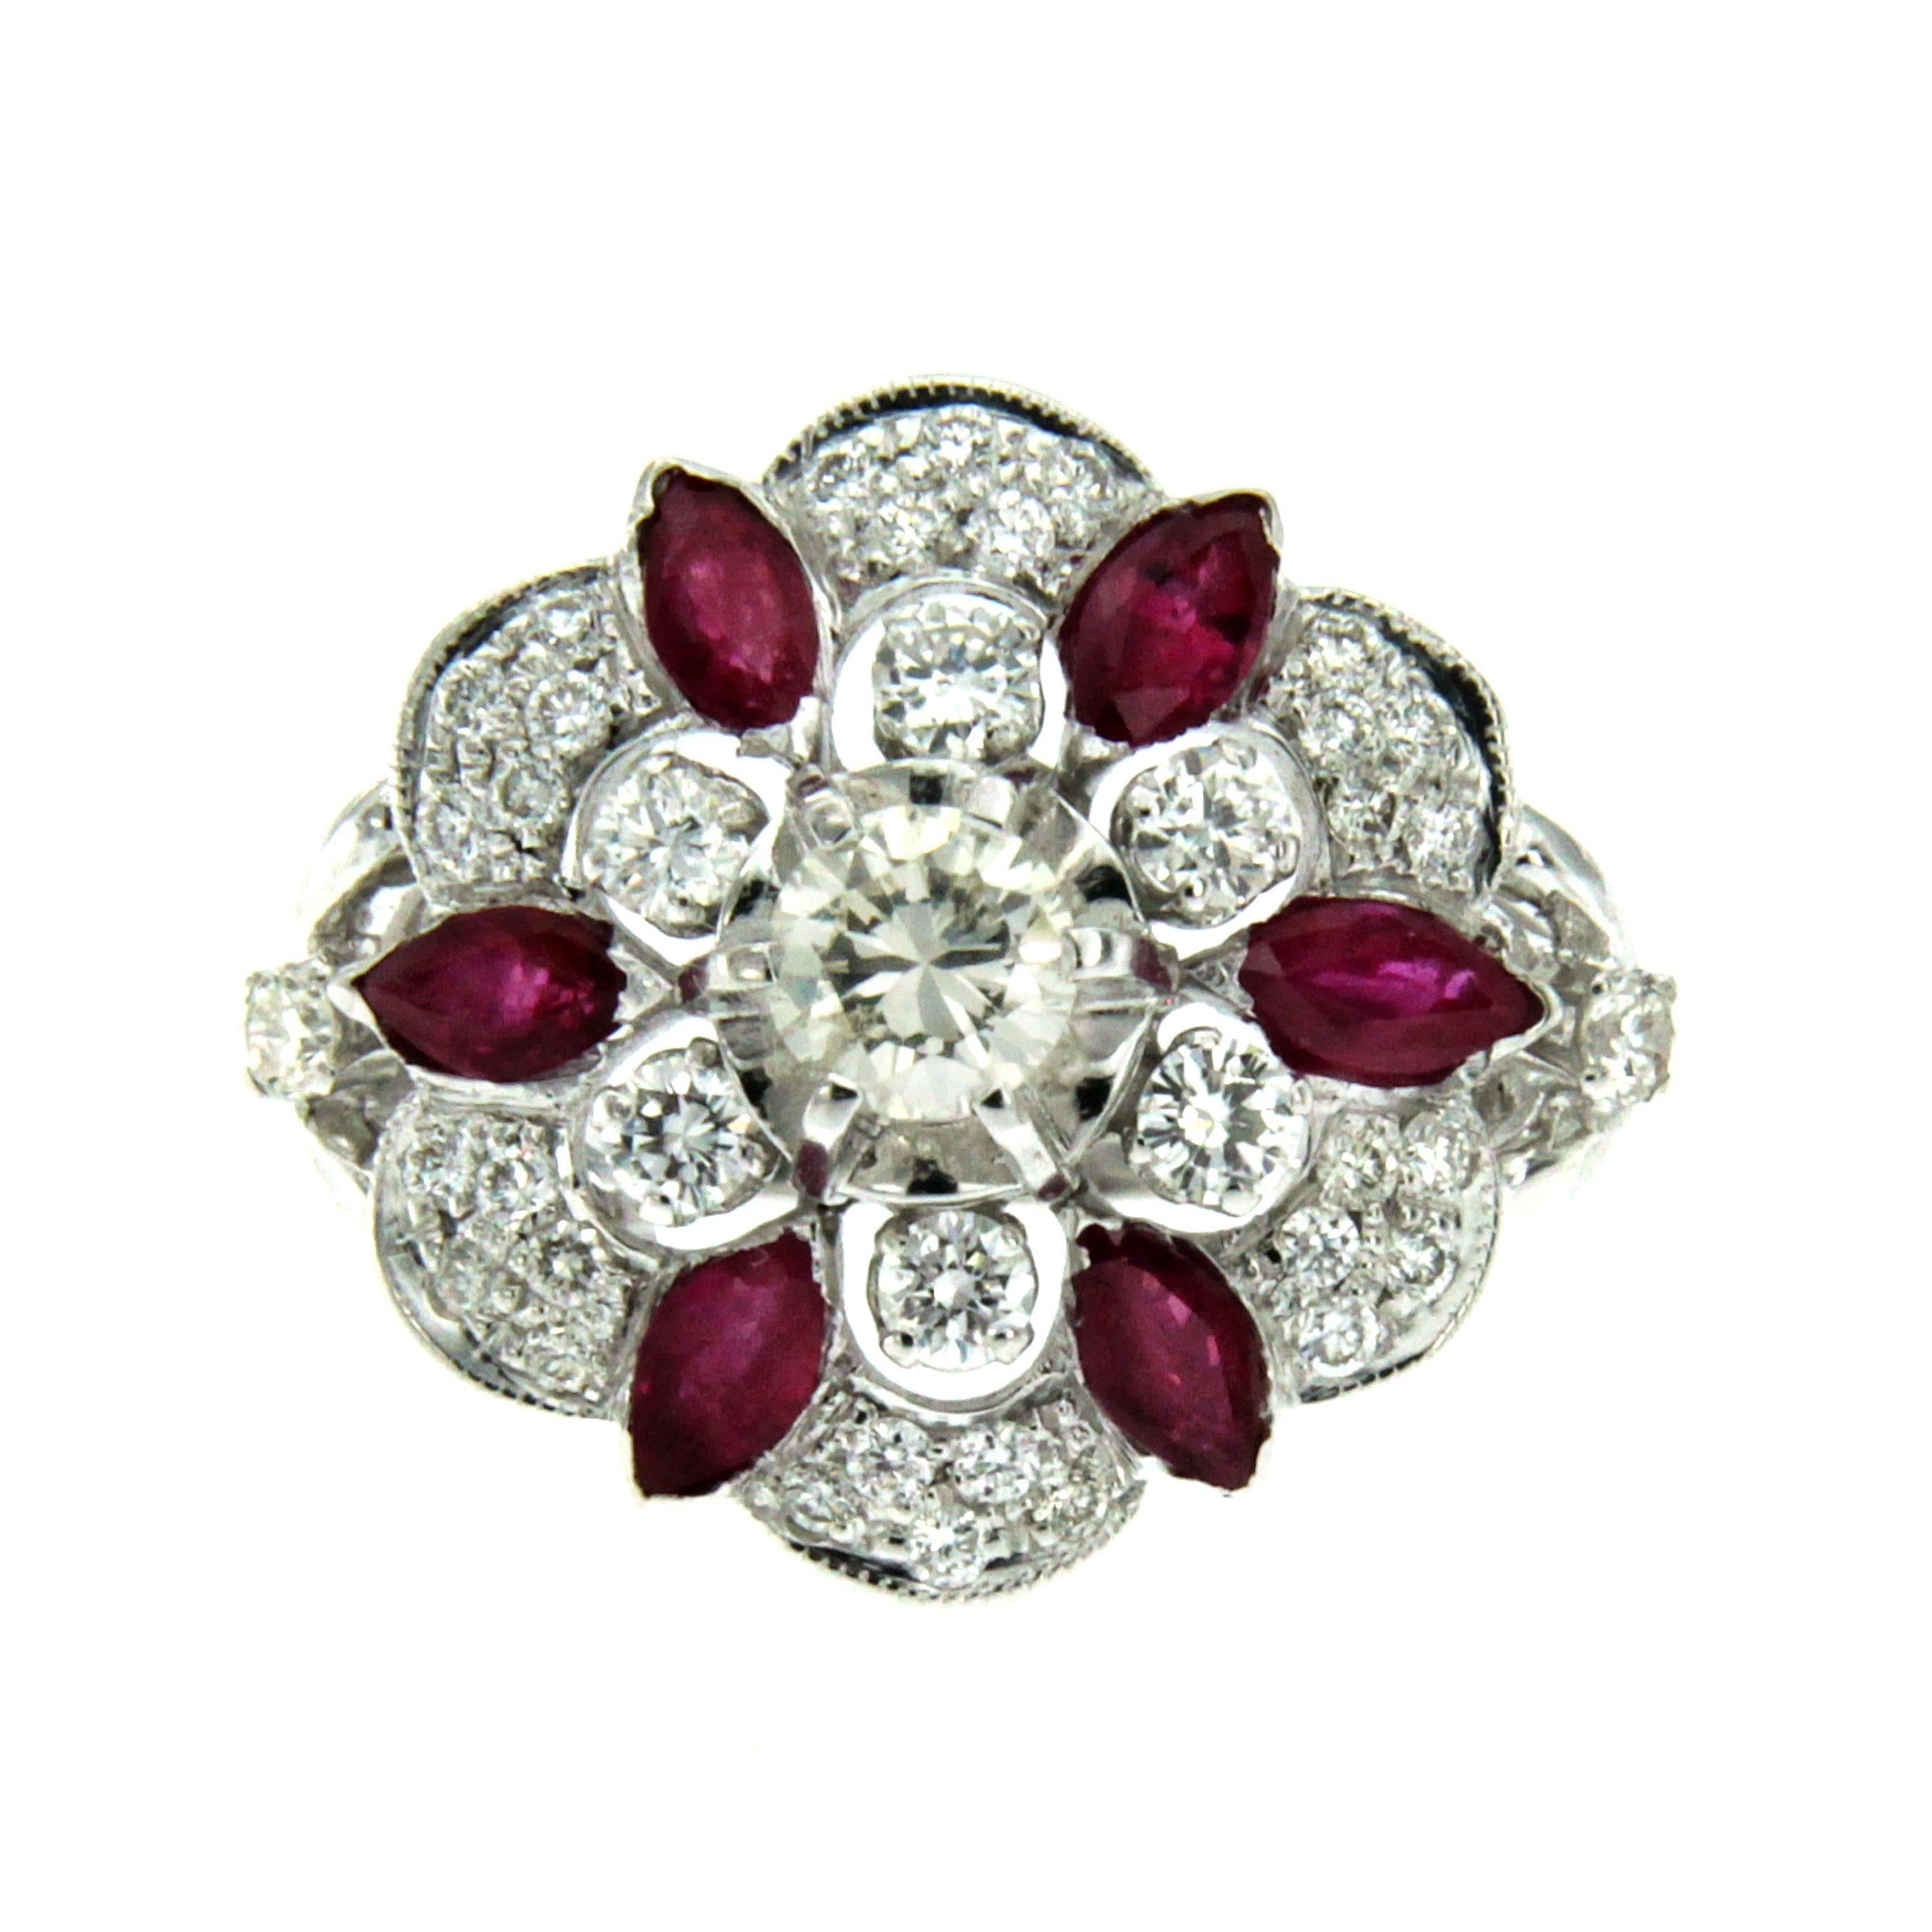 A master-crafted 18k Gold ring composed of round brilliant cut Diamonds weighing approx. 0.90 ct  graded color F-G clarity Vs and navette cut Rubies of approx. 0.95 total carats.
Circa 1950

CONDITION: Pre-owned - Excellent
METAL: 18k yellow and